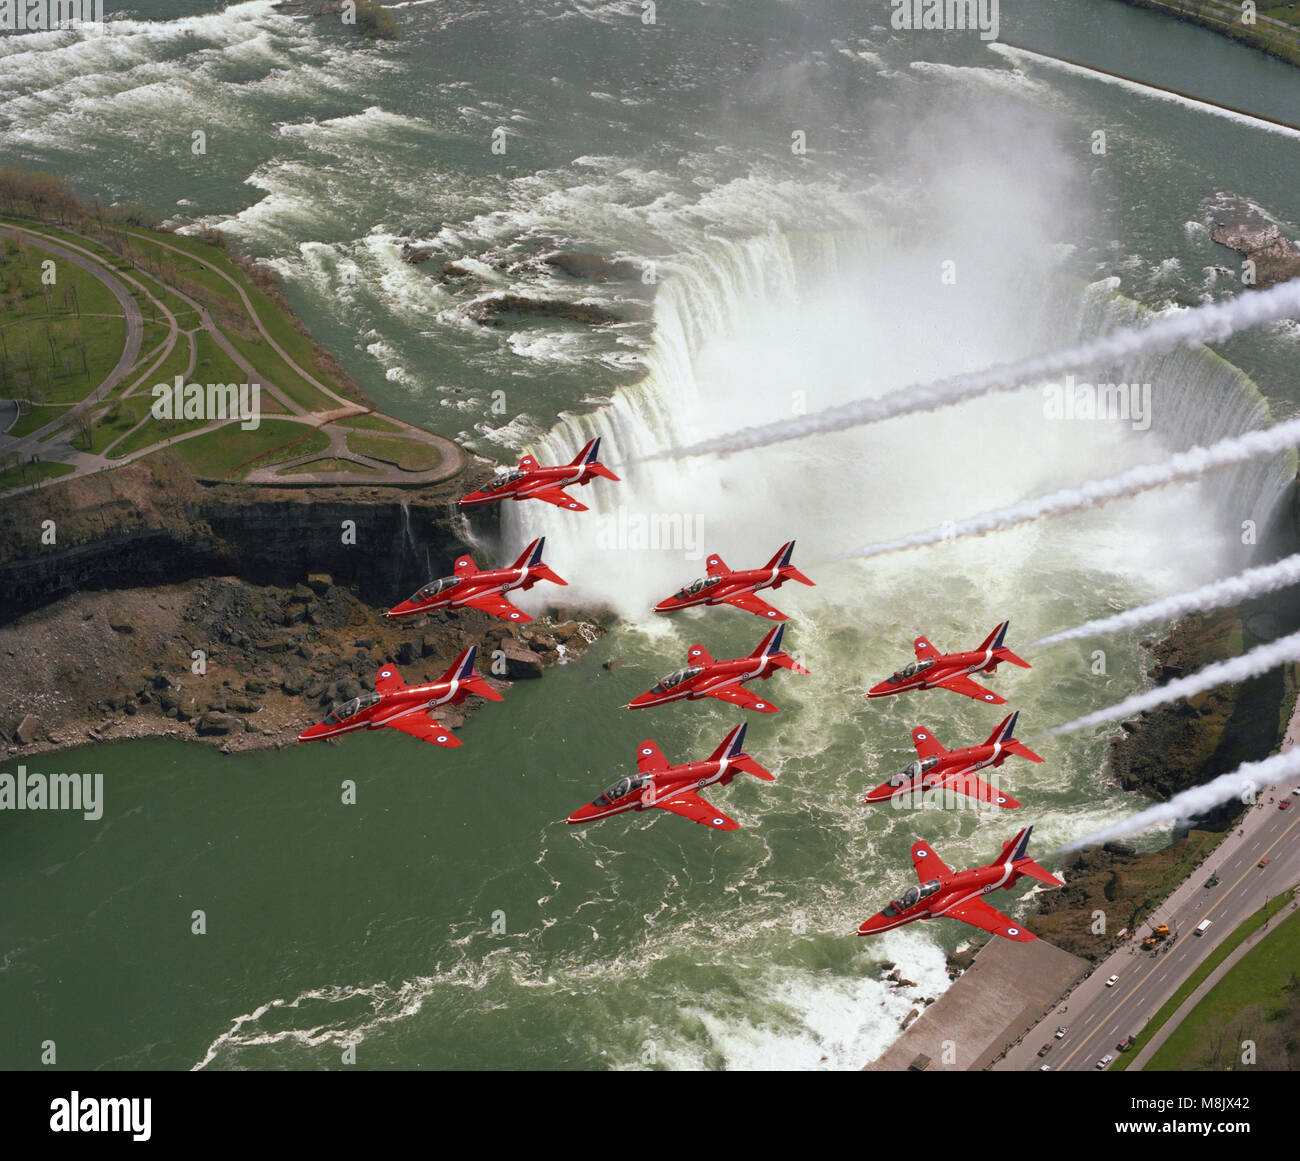 The Red Arrows  ( the Aerobatic display team of the Royal Air Force), overflying Niagara Falls, Canada Stock Photo